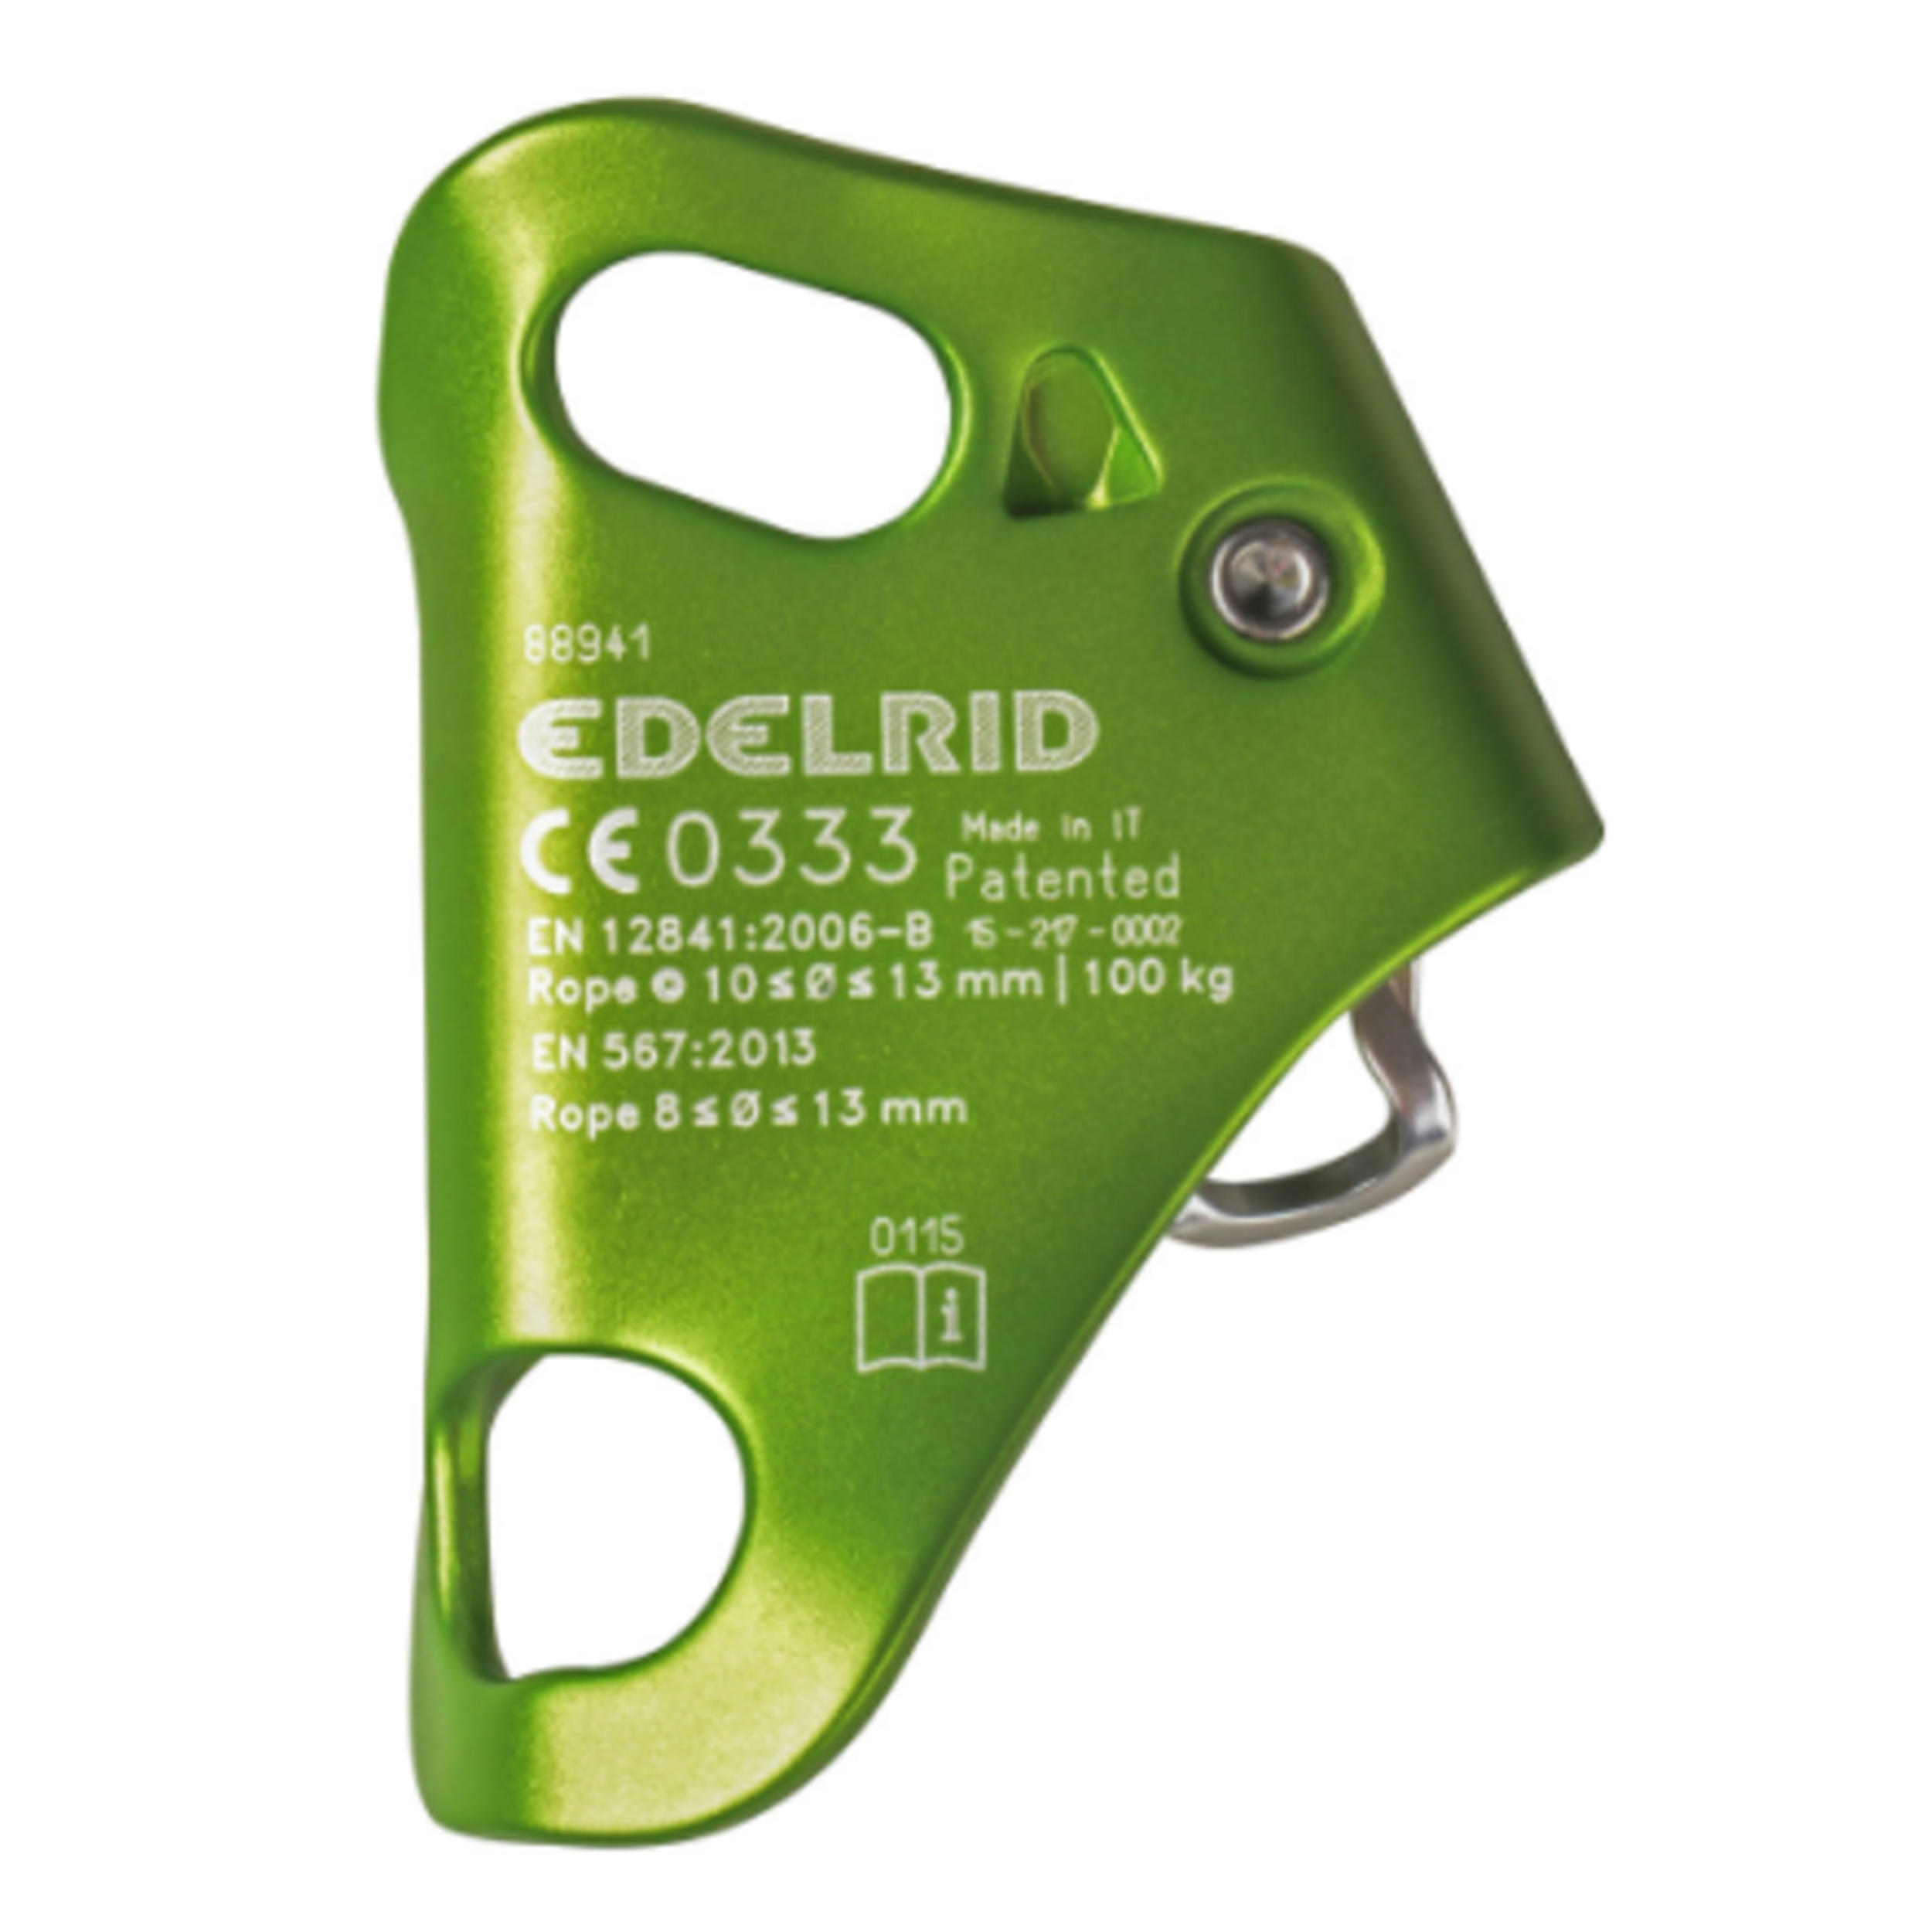 Ventral blocker for climbing and mountaineering - WIND UP 2/2